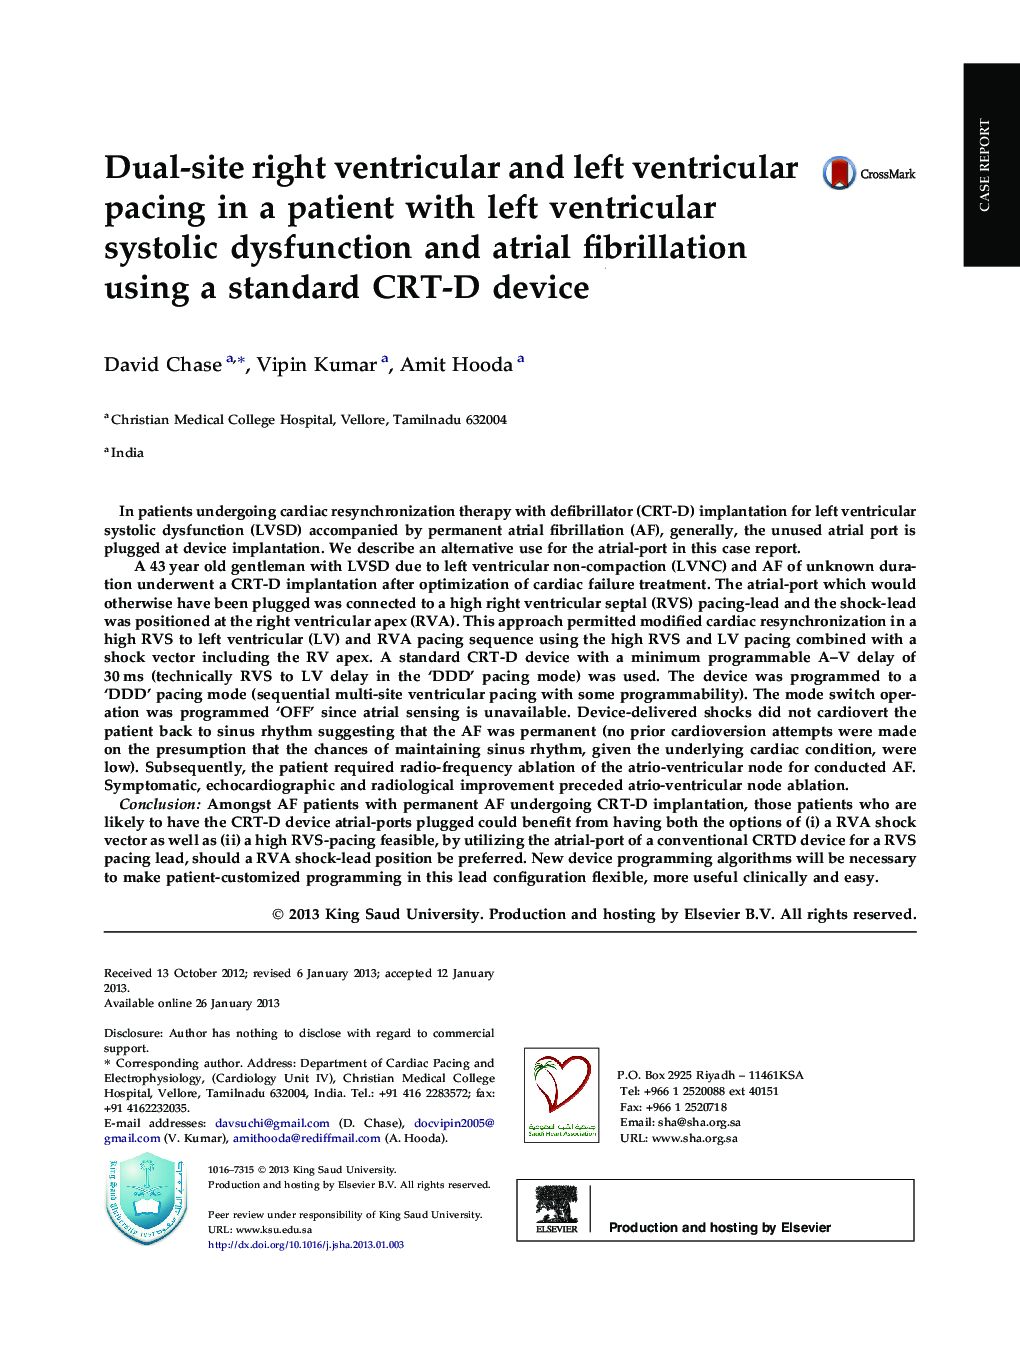 Dual-site right ventricular and left ventricular pacing in a patient with left ventricular systolic dysfunction and atrial fibrillation using a standard CRT-D device 